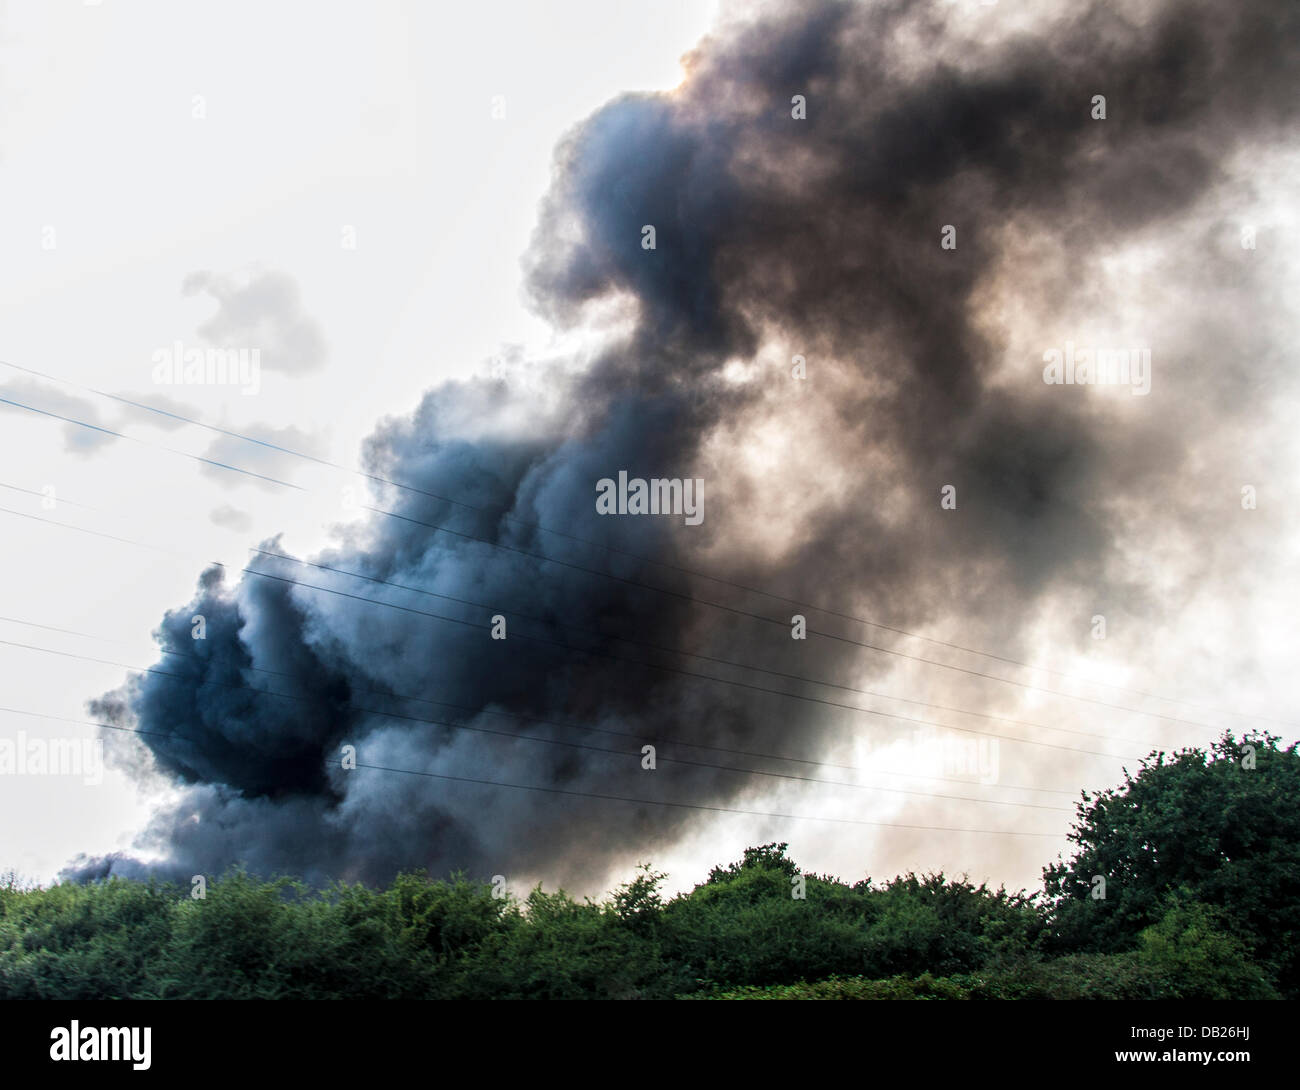 Potters Bar, UK. 22nd July, 2013. The M25 motorway is closed in both directions between junctions 23 (A1M) and 25 (Enfield) because of a serious fire. Monday, July 22, 2013 Credit:  Guy Wells/Alamy Live News Stock Photo